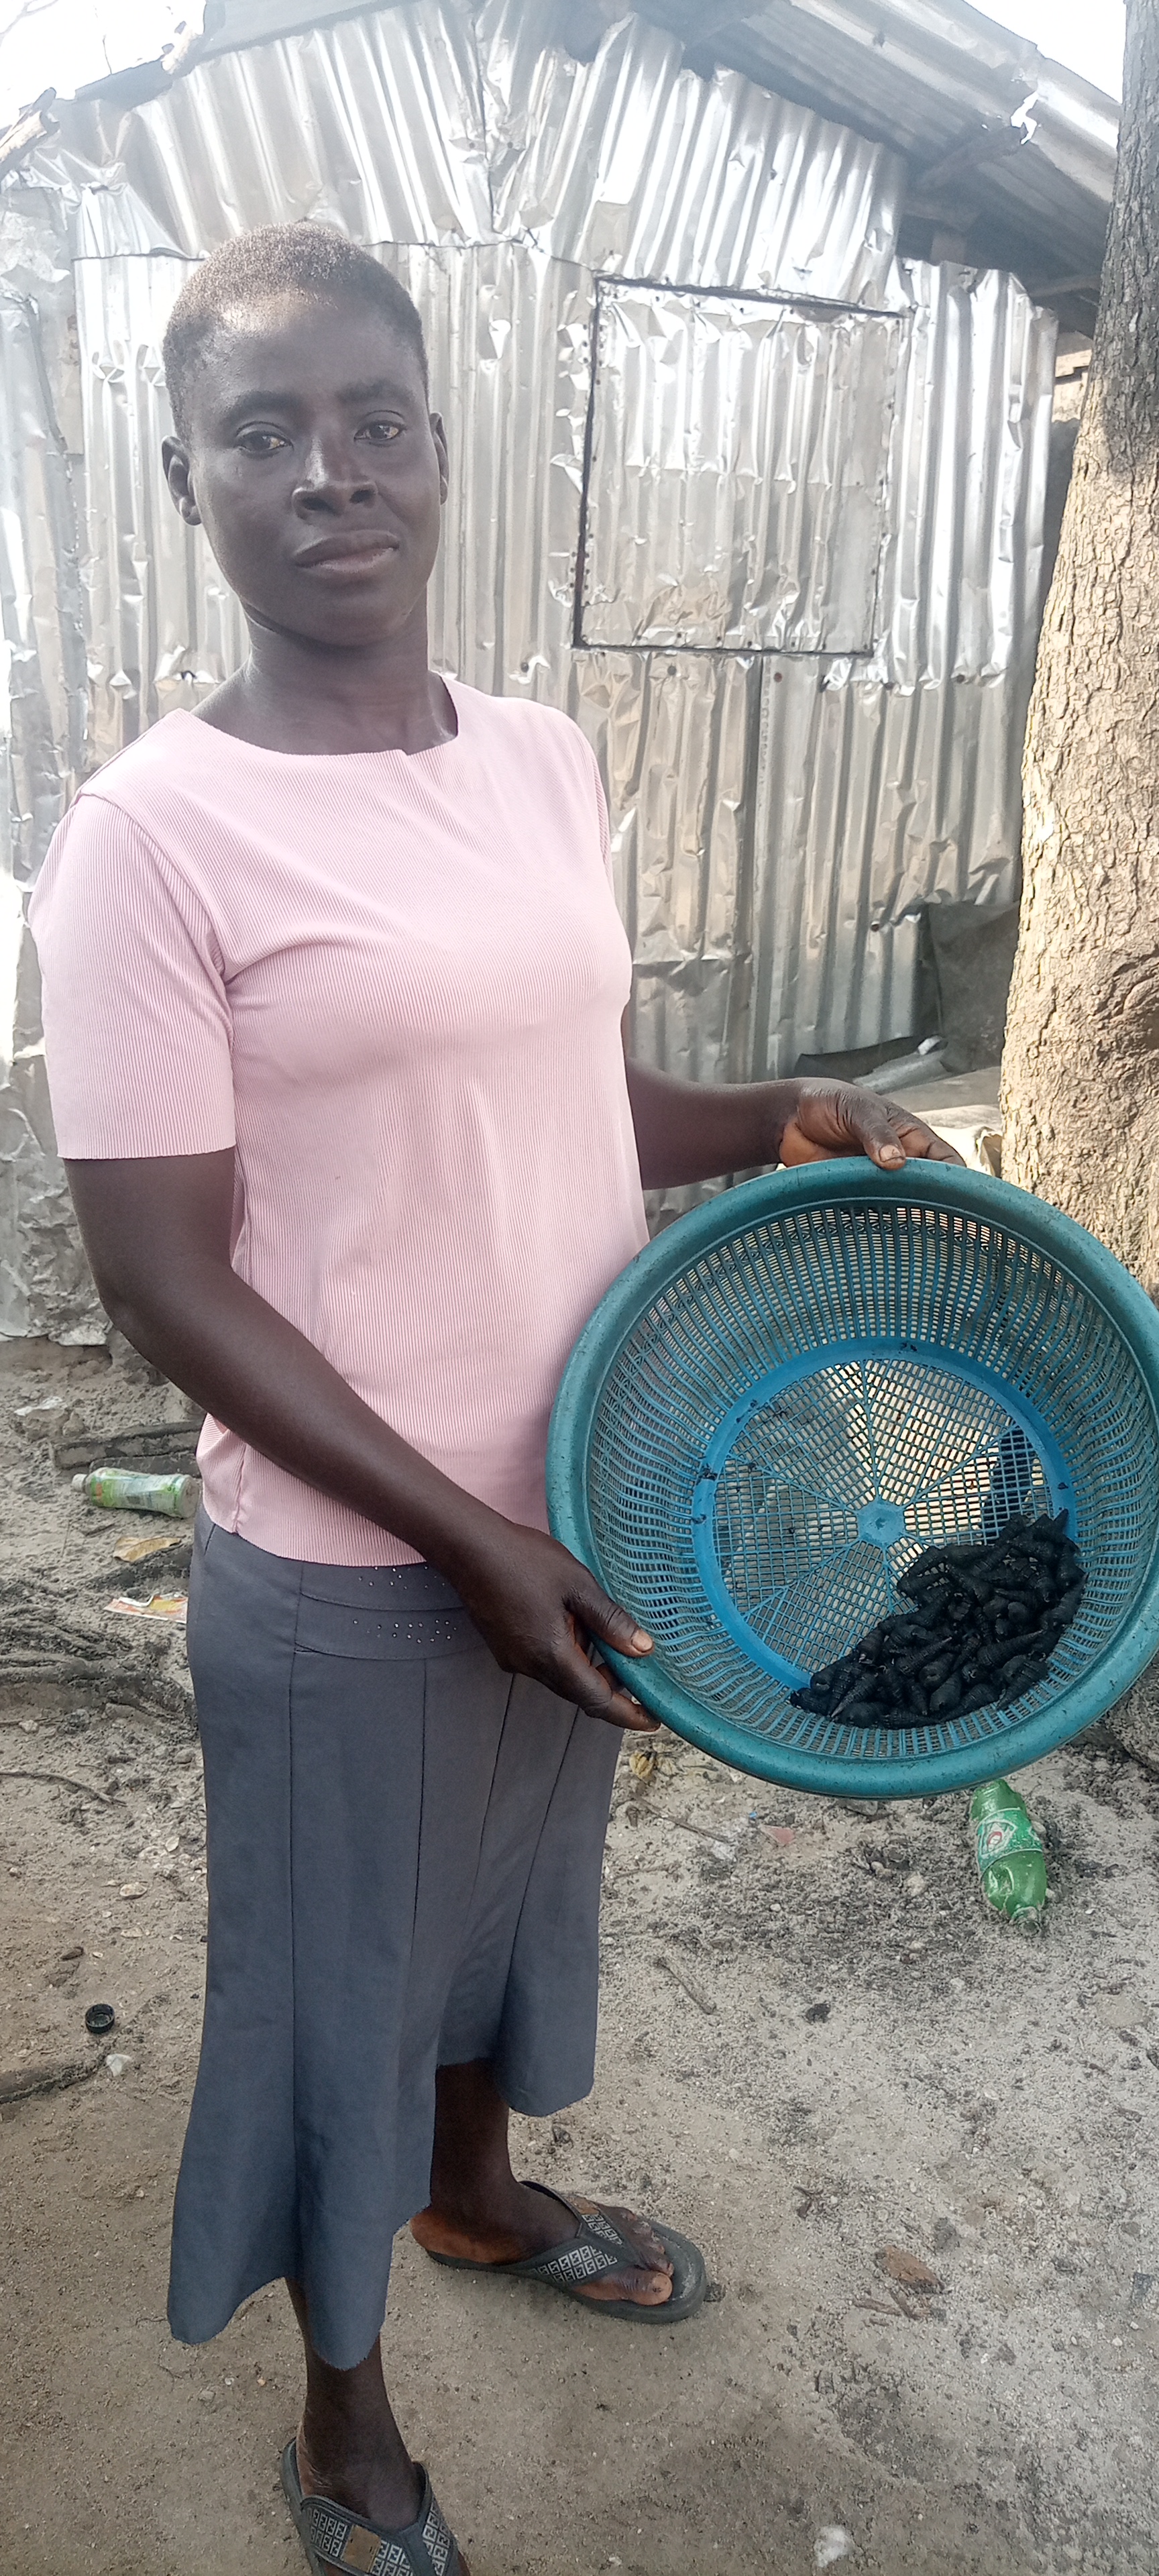 Loretta holding periwinkles she and her sister caught from the Creek of Alakiri after spending hours. Photo Credit: Elfredah Kevin-Alerechi